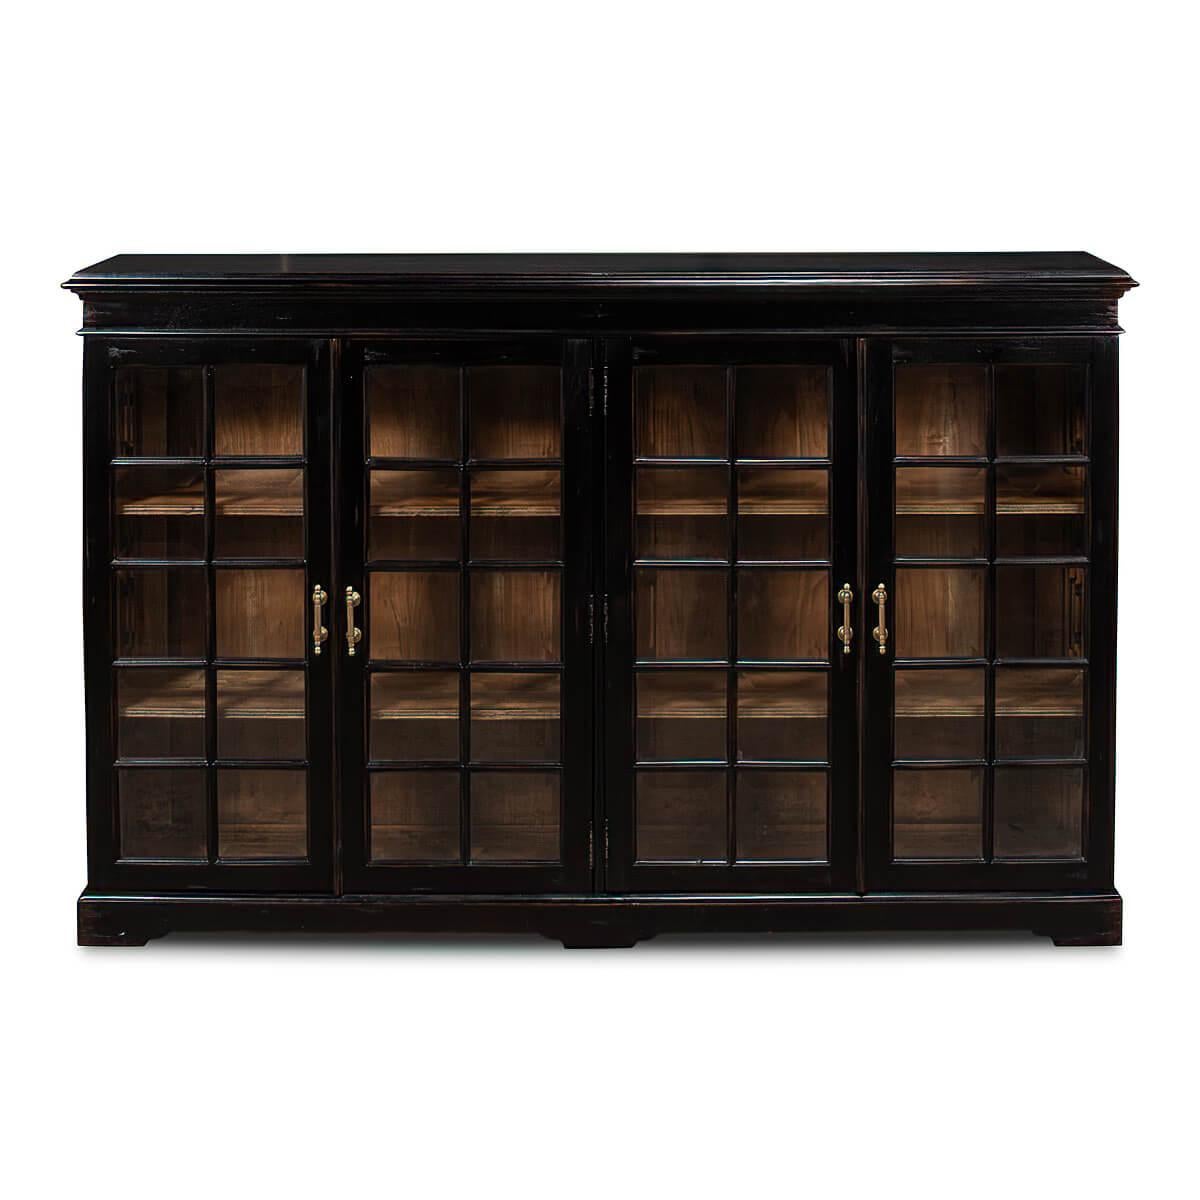 An English Rustic Country house style walnut four-door low bookcase with an antiqued and ebonized exterior, with glass doors and antiqued brass handles. With four adjustable shelves to the interior.

Dimensions
67